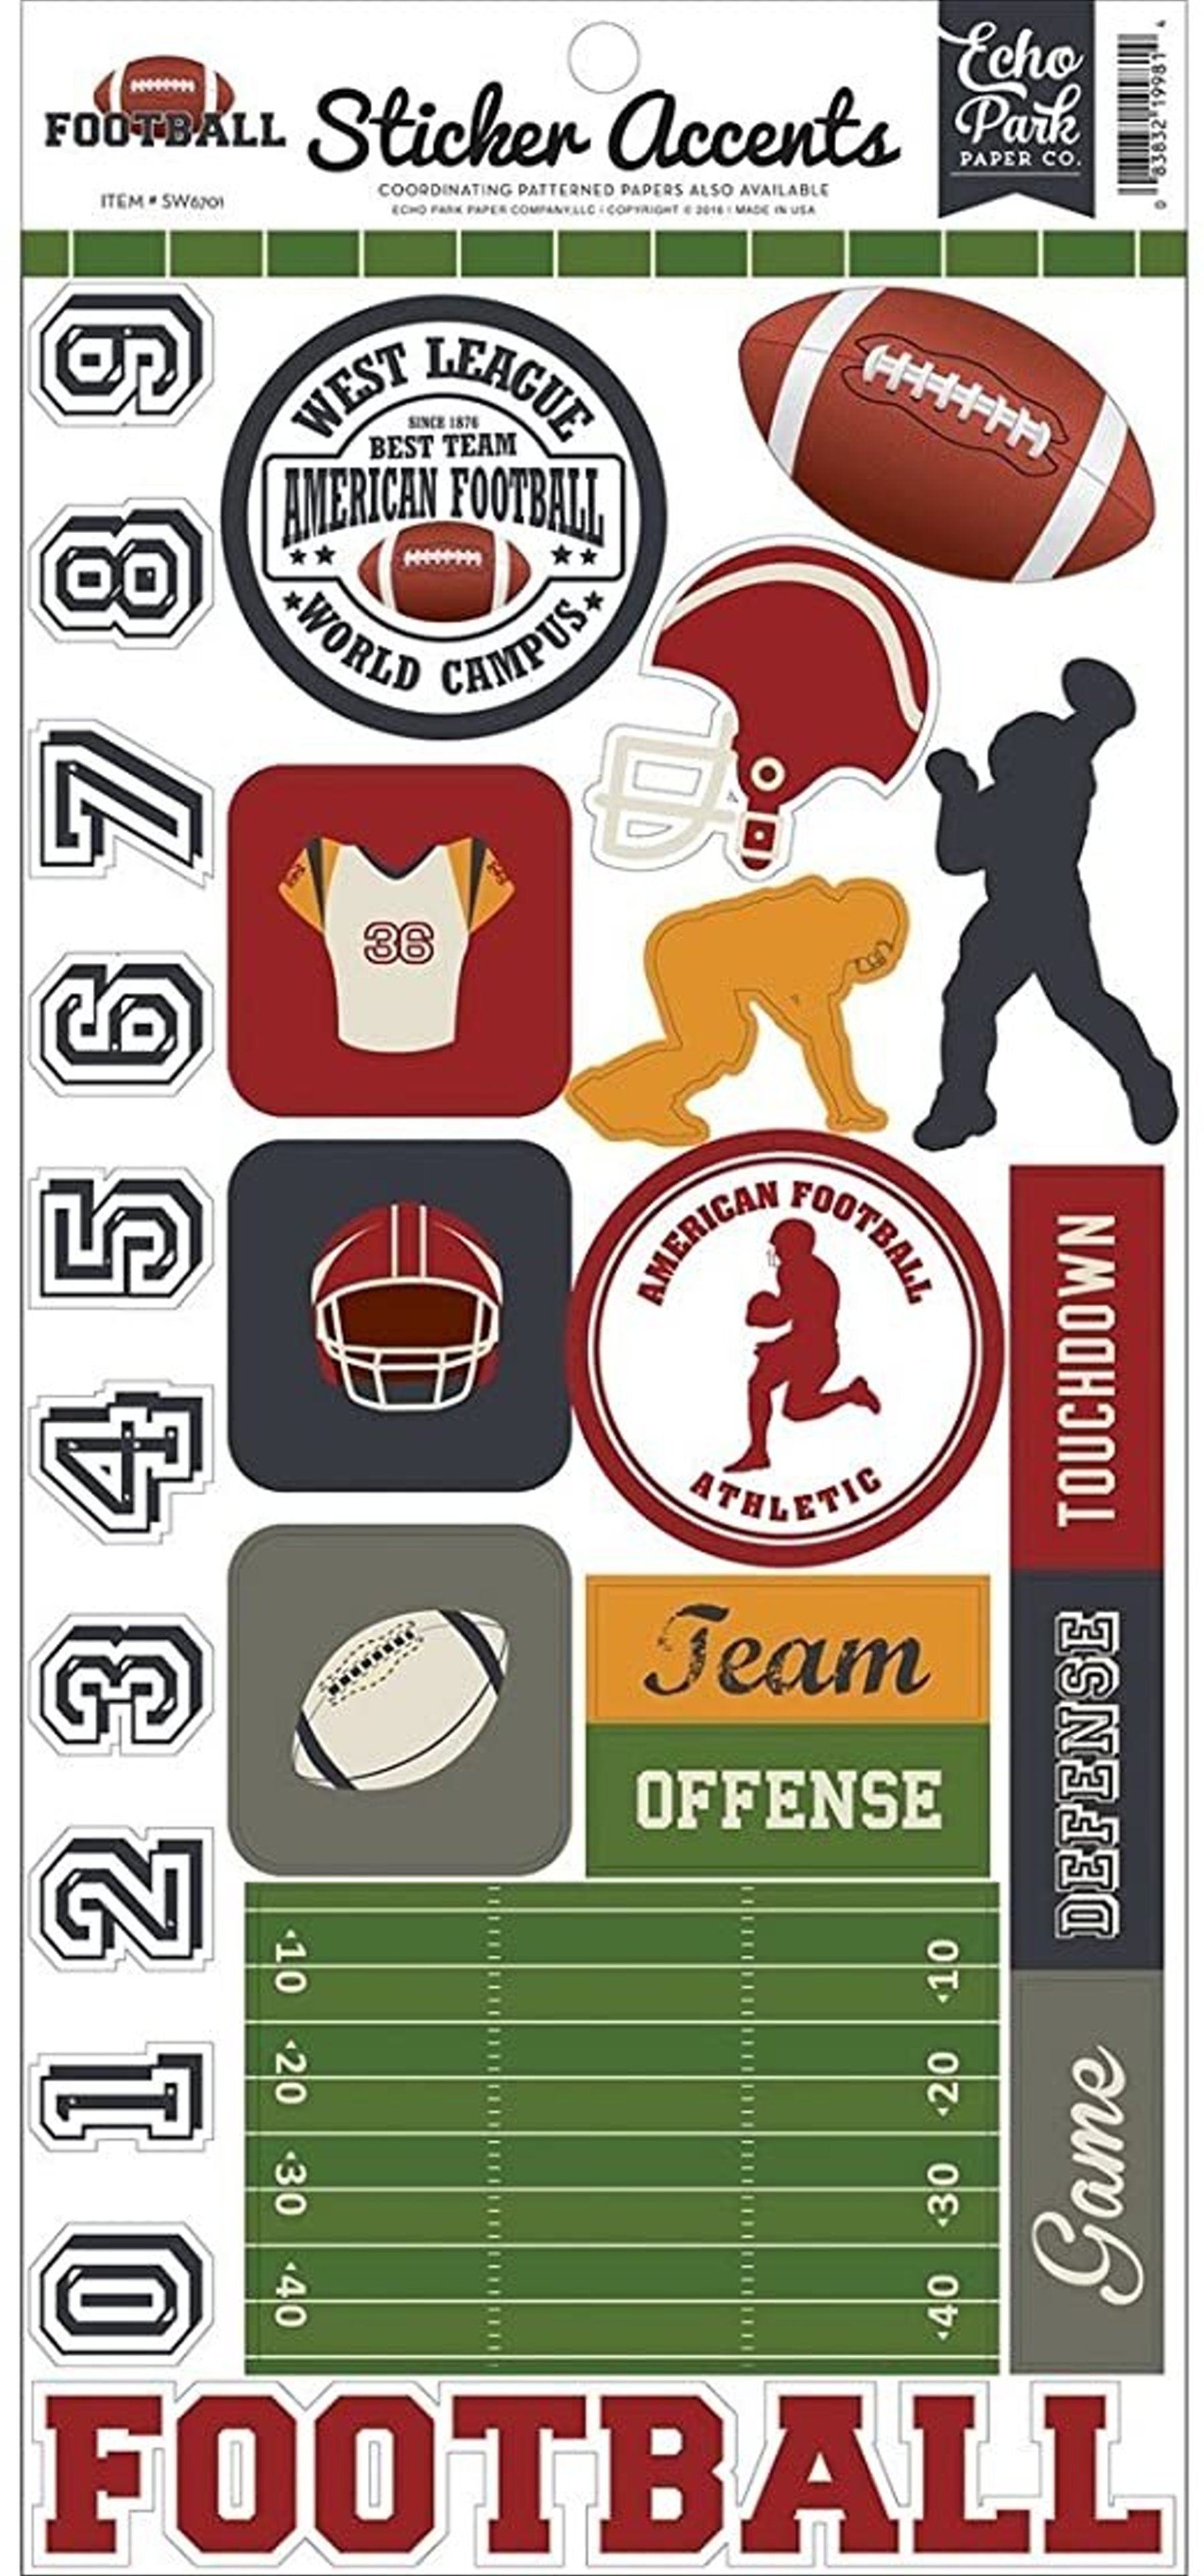 Echo Park Football Cardstock Sticker Accents